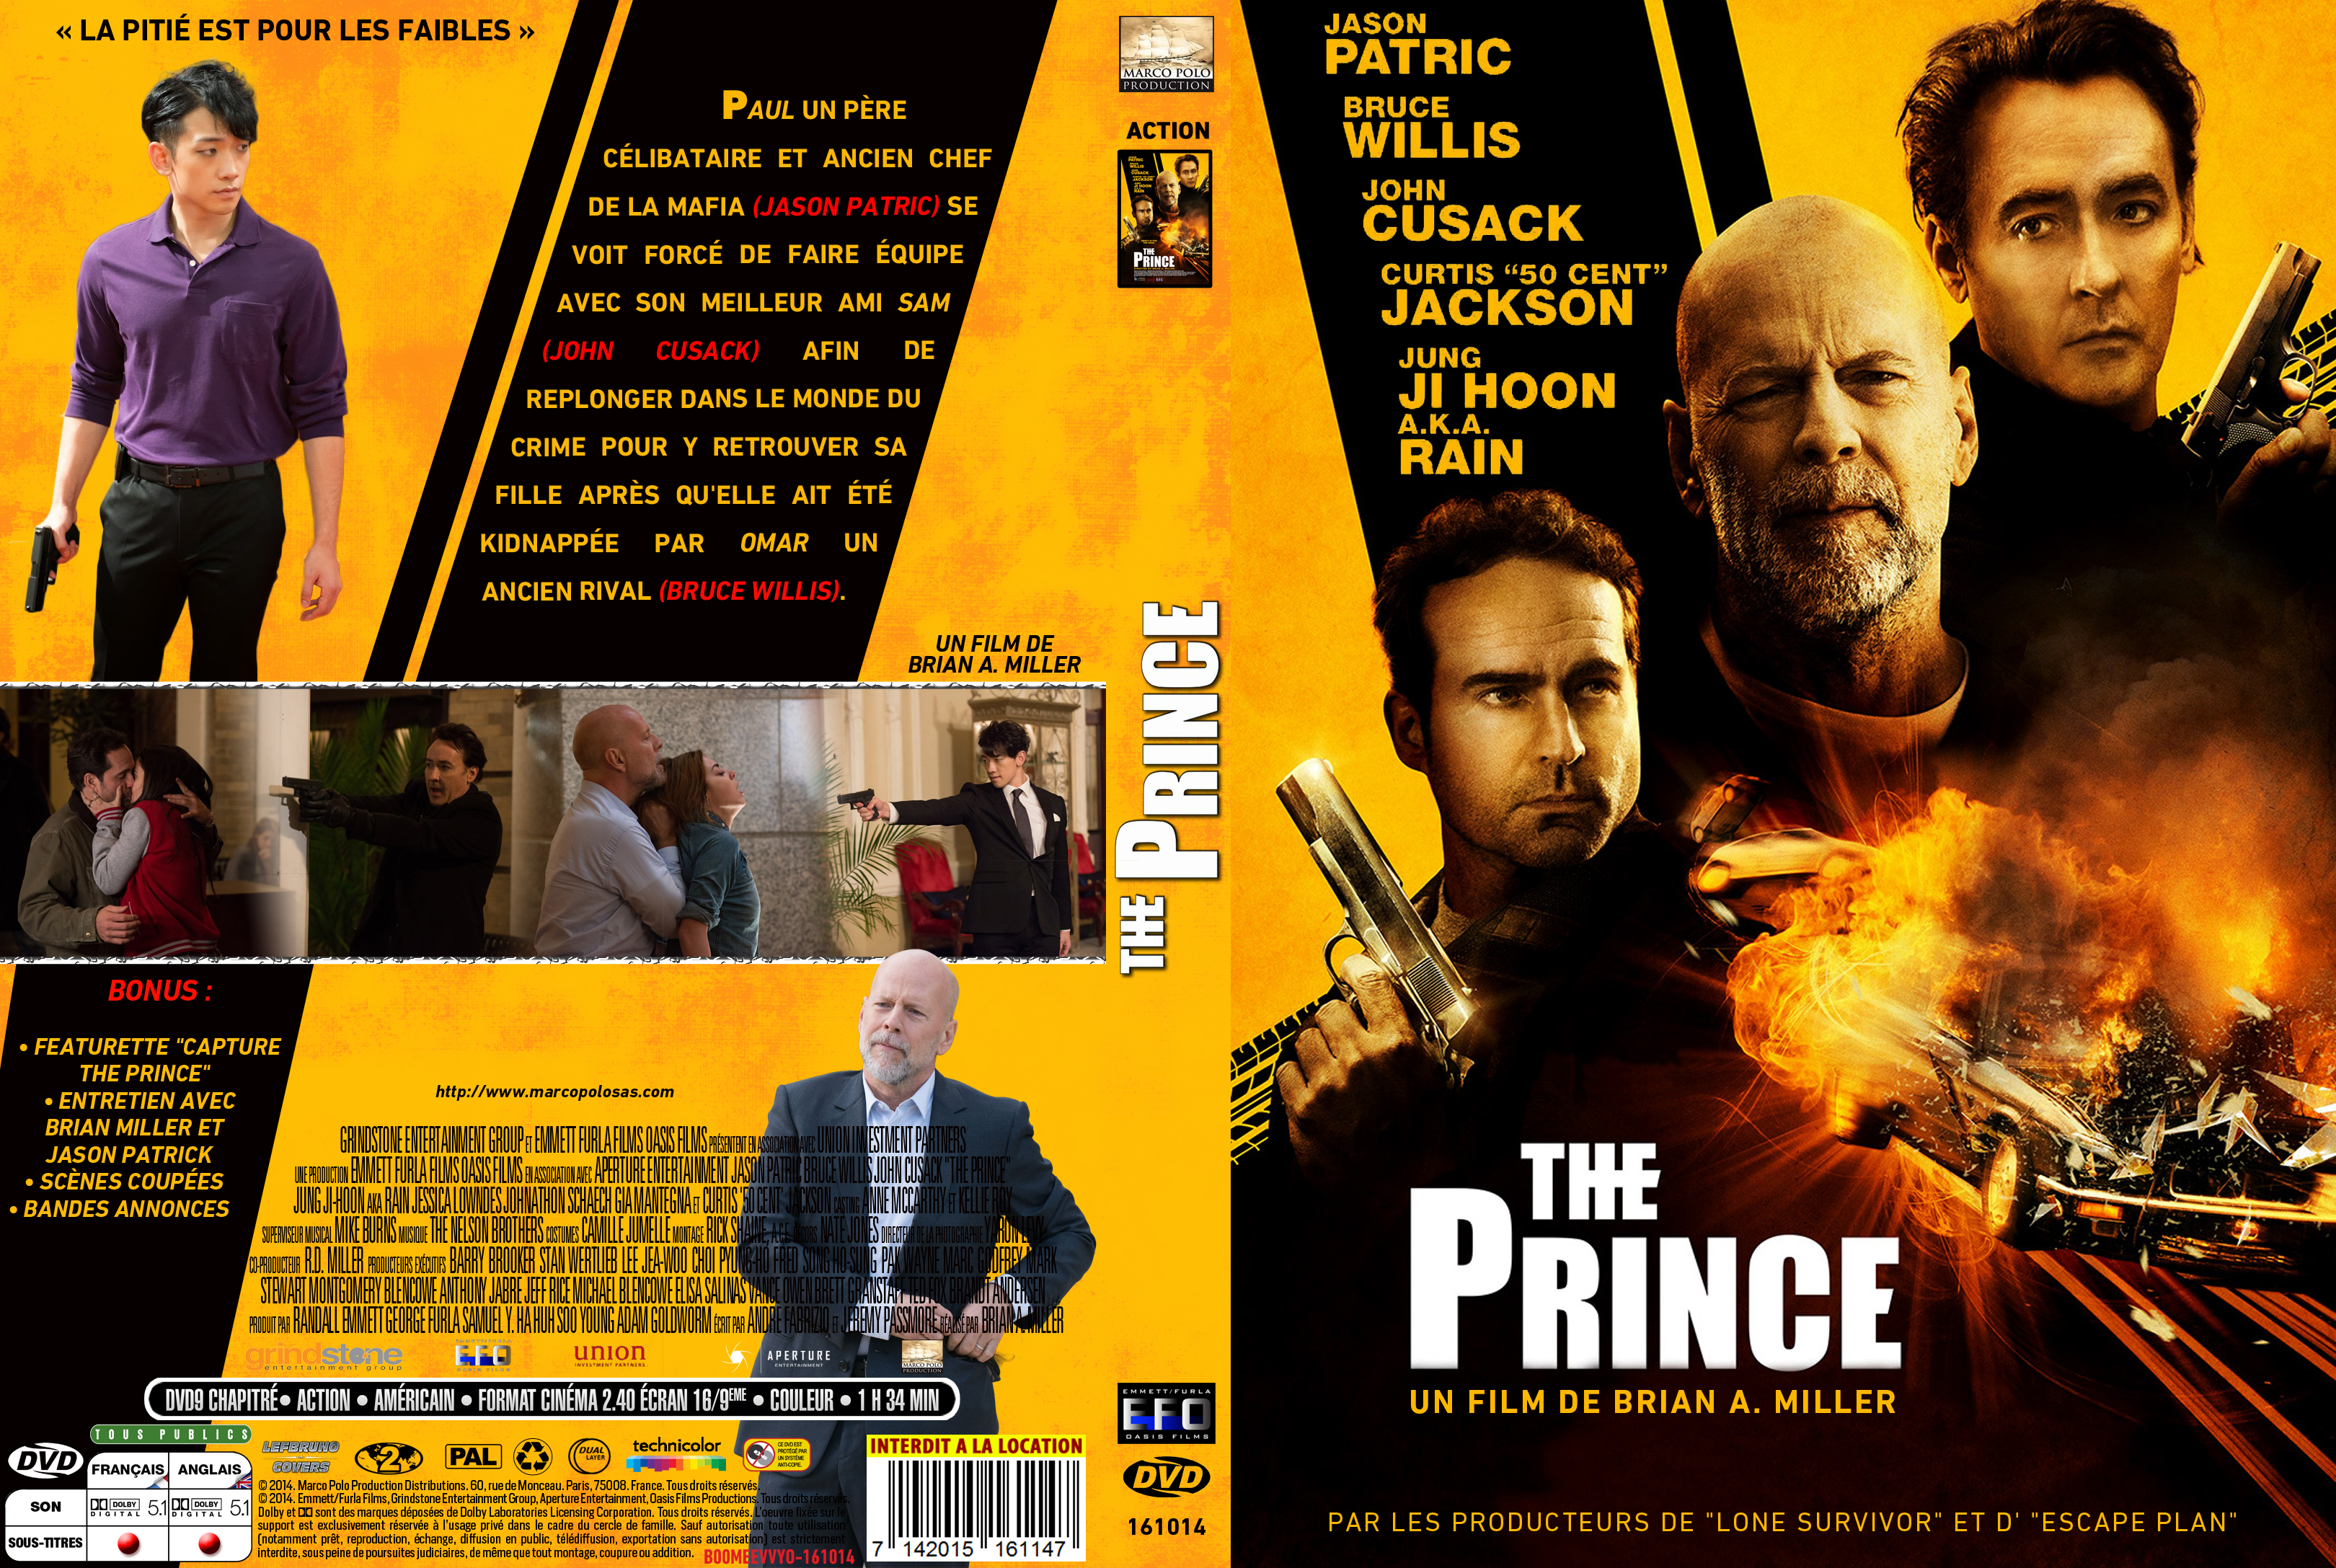 Jaquette DVD The Prince custom